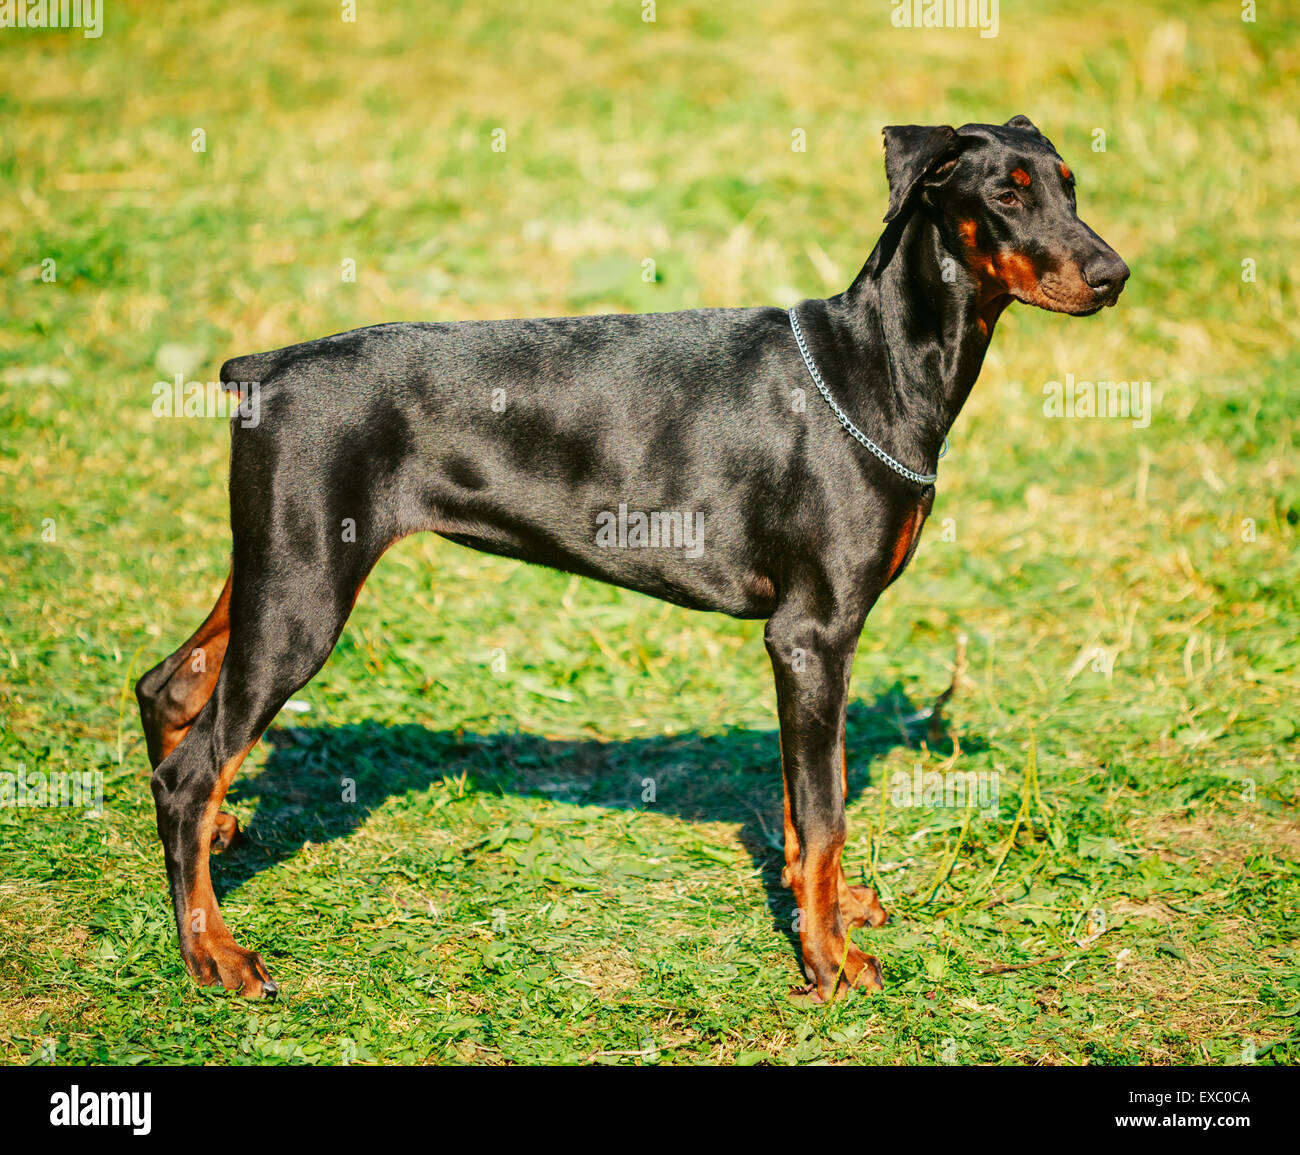 Young, Beautiful, Black And Tan Doberman Standing On Lawn. Dobermann Is A Breed Known For Being Intelligent, Alert, And Loyal Co Stock Photo